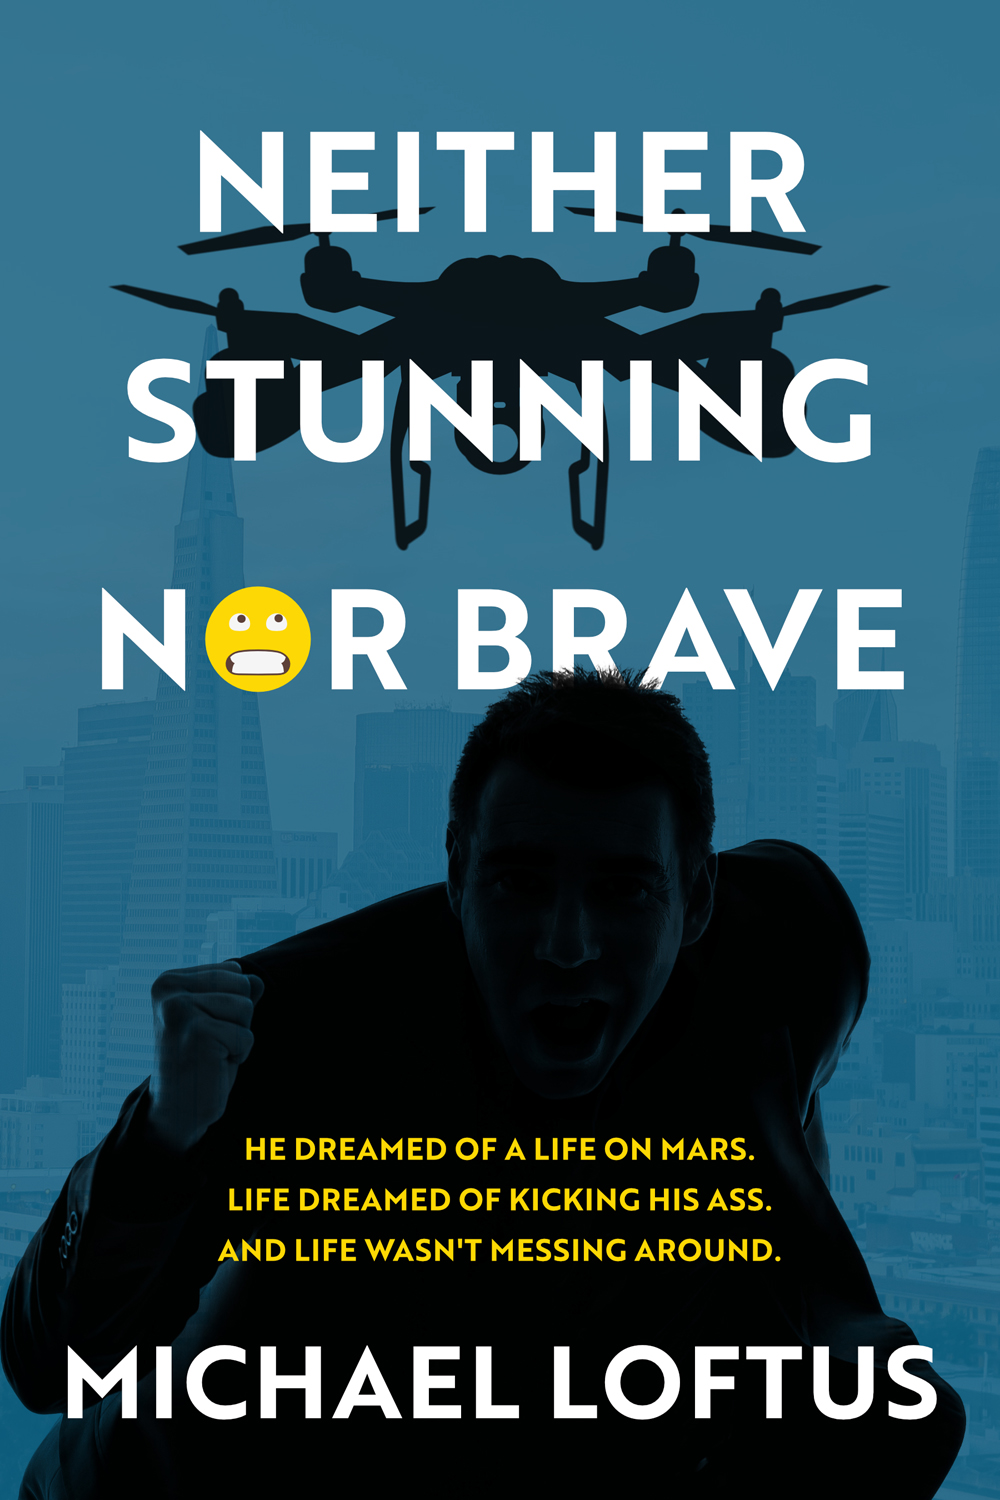 Book cover of the comedic sci-fi novel, 'Neither Stunning nor Brave' (2022) by Michael Loftus.